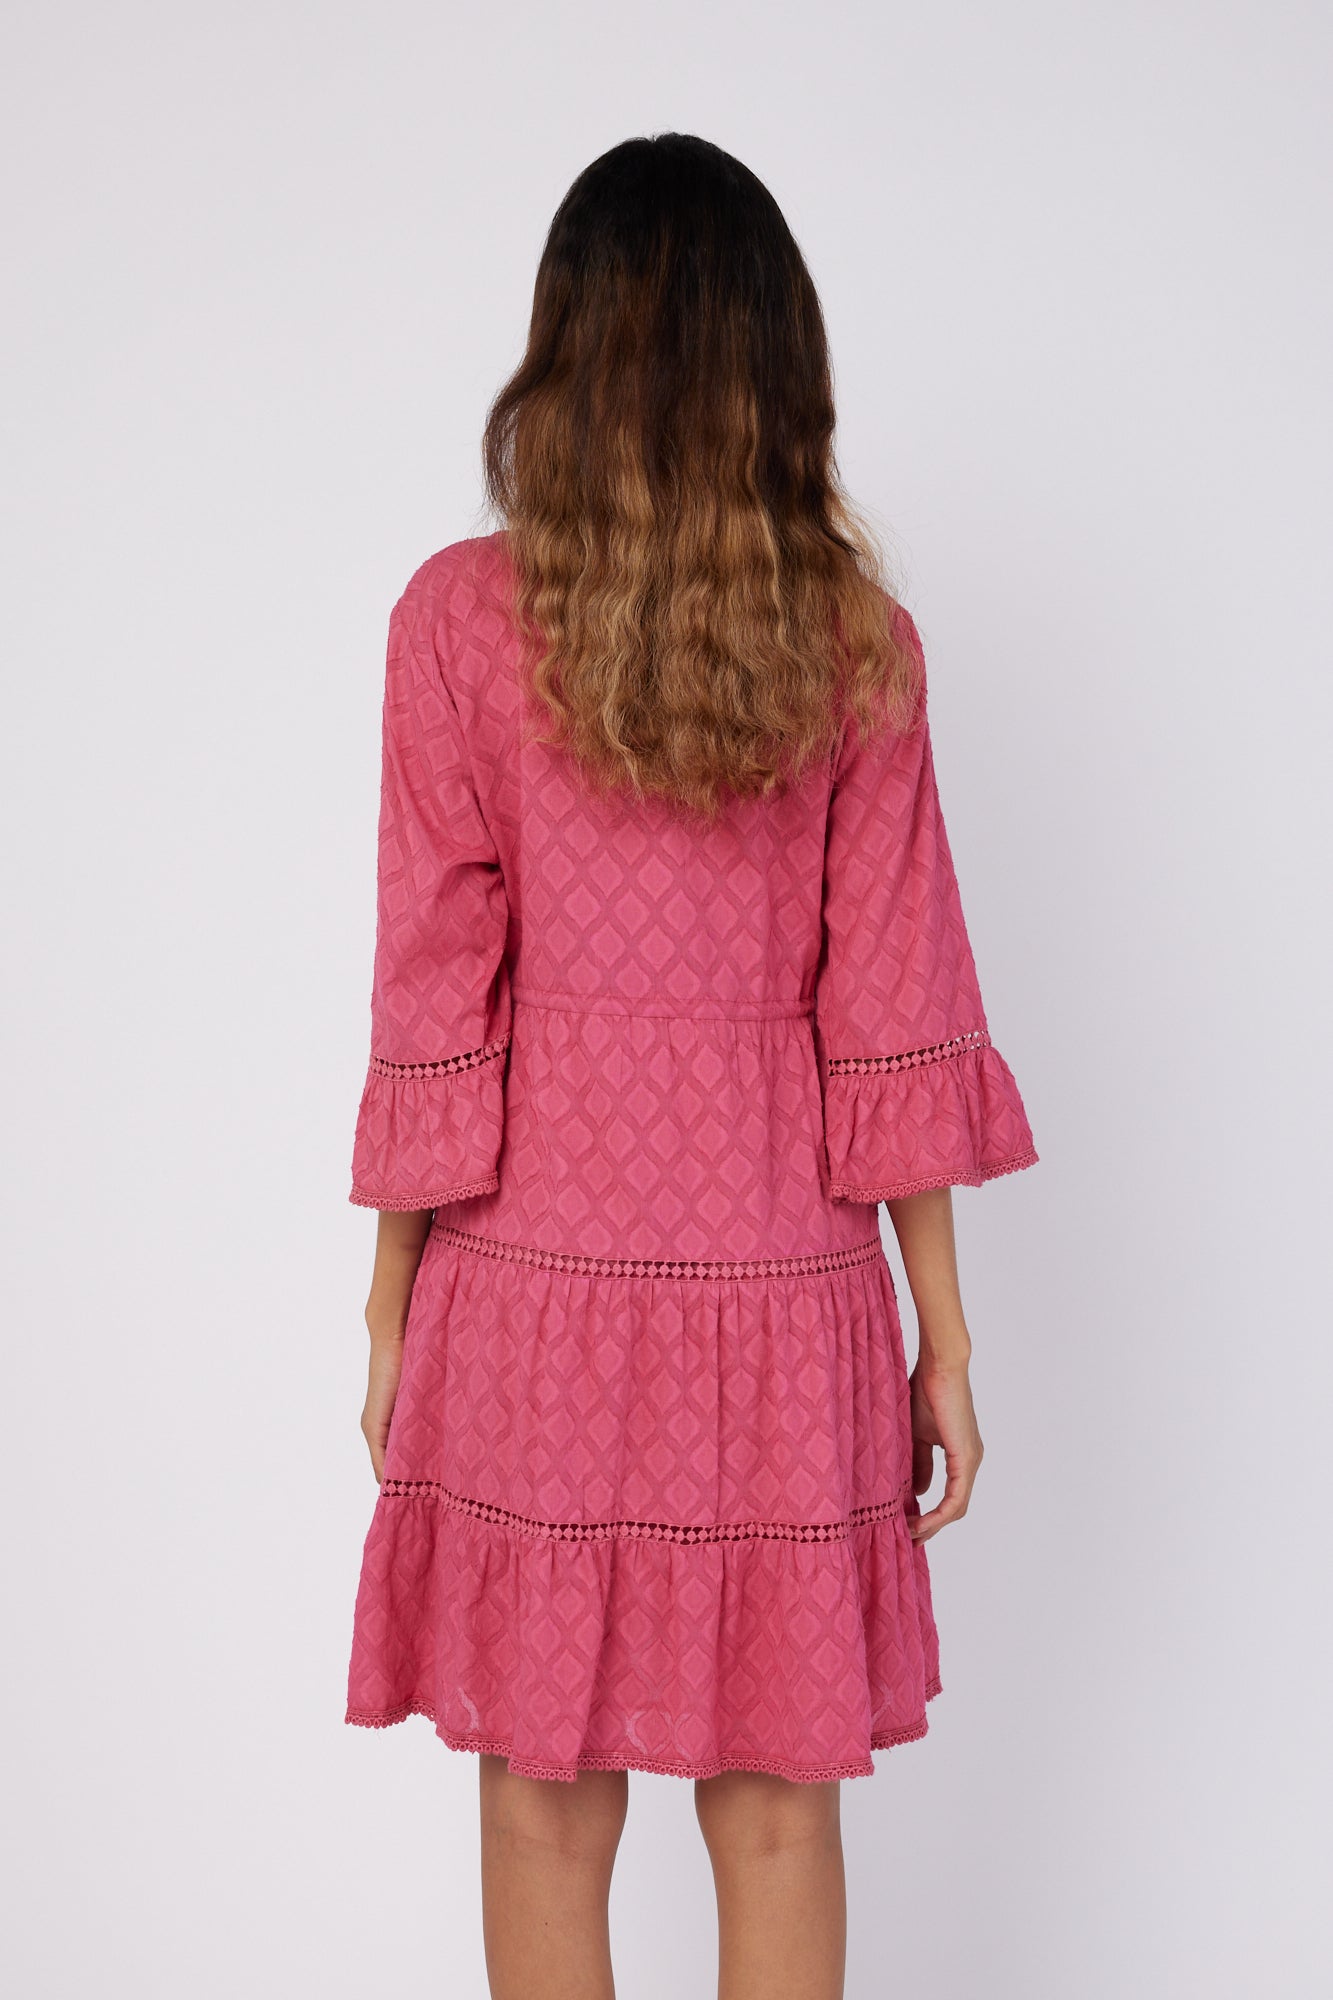 ModaPosa Desideria 3/4 Frill Sleeve Drawstring Empire Jacquard Knee Length Dress in Raspberry . Discover women's resort dresses and lifestyle clothing inspired by the Mediterranean. Free worldwide shipping available!